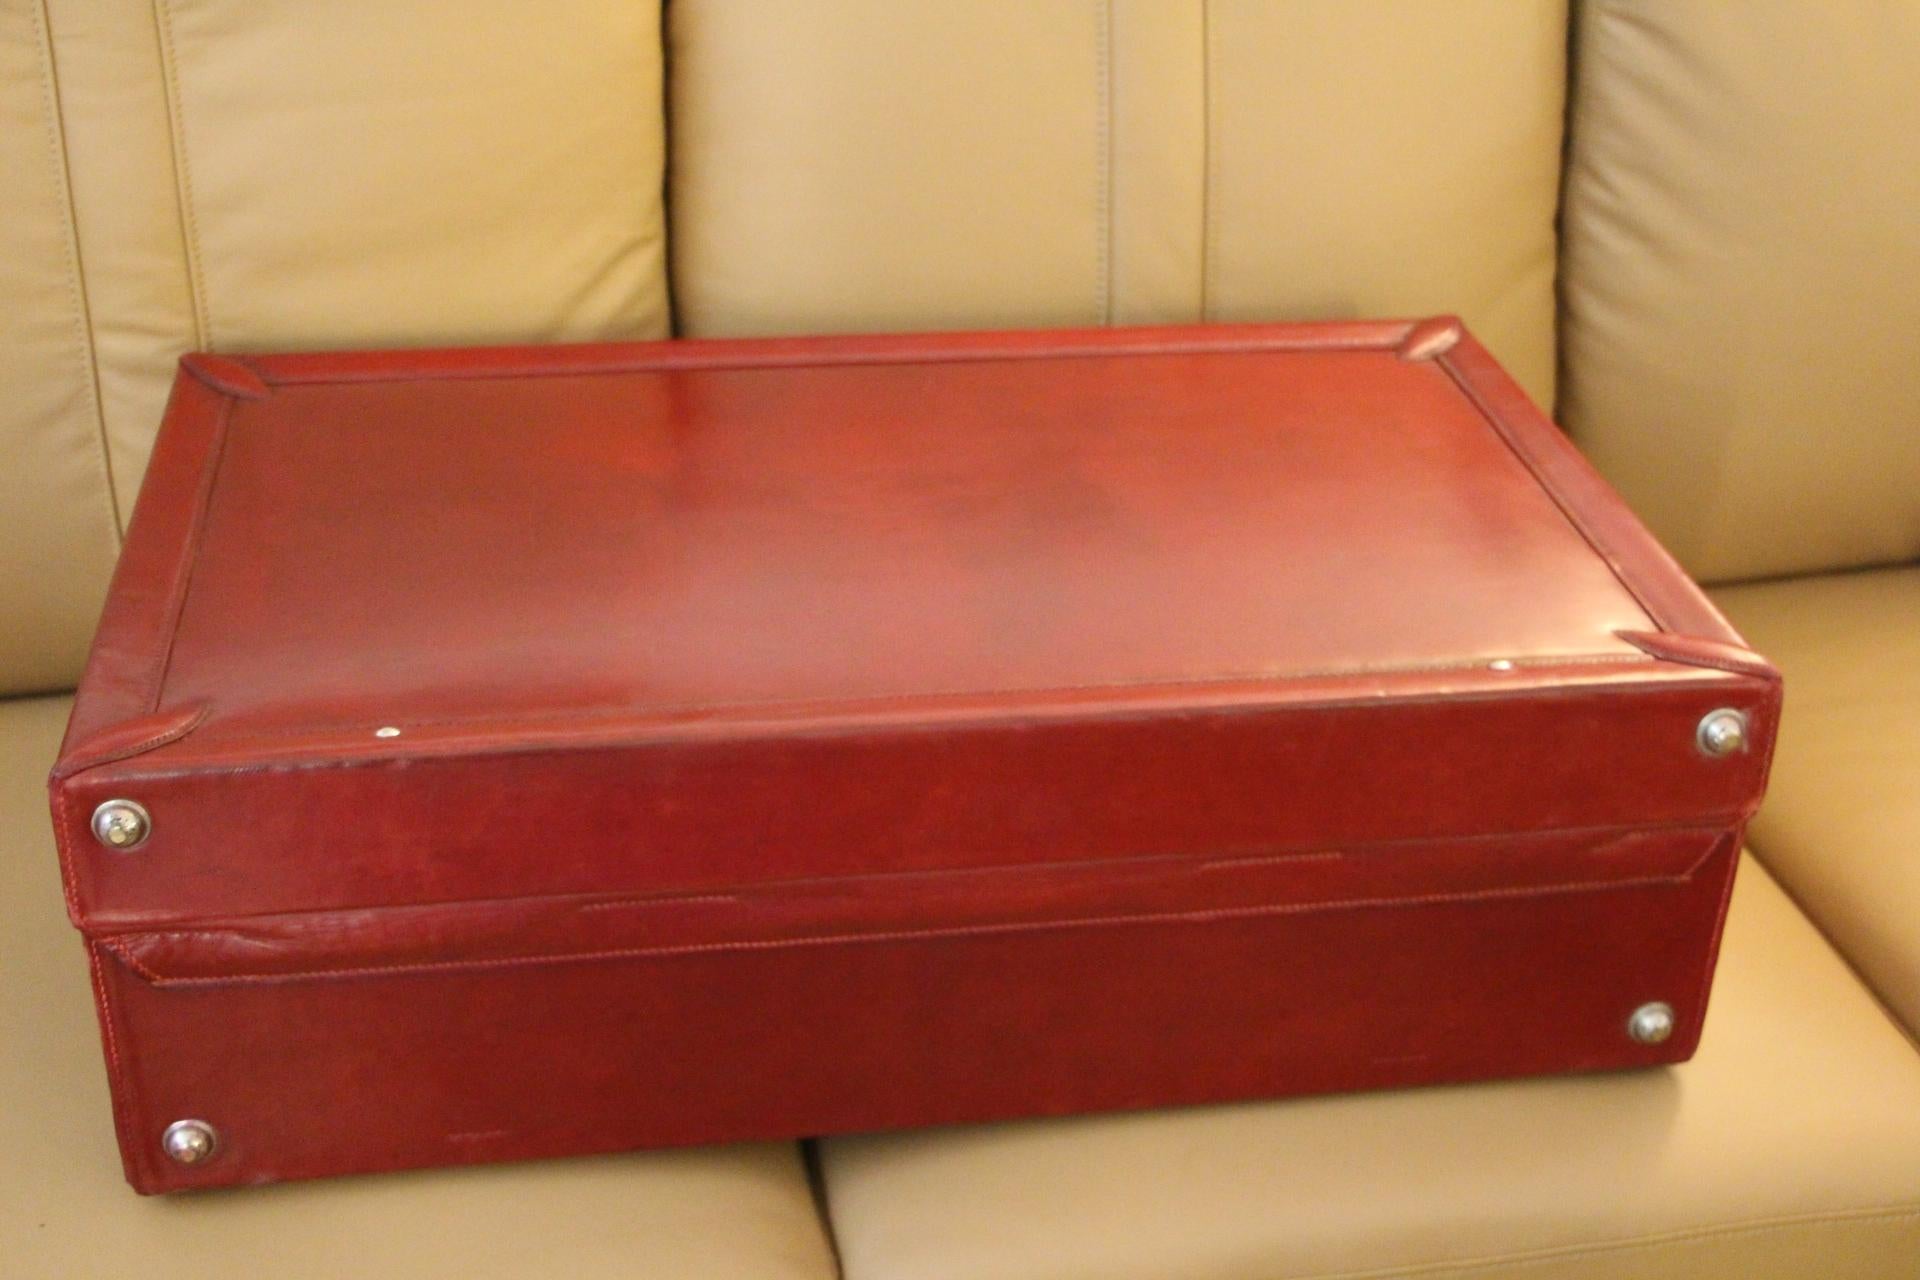 Red Leather Hermes Suitcase 70 cm, Hermes Trunk, Hermes Luggage 10